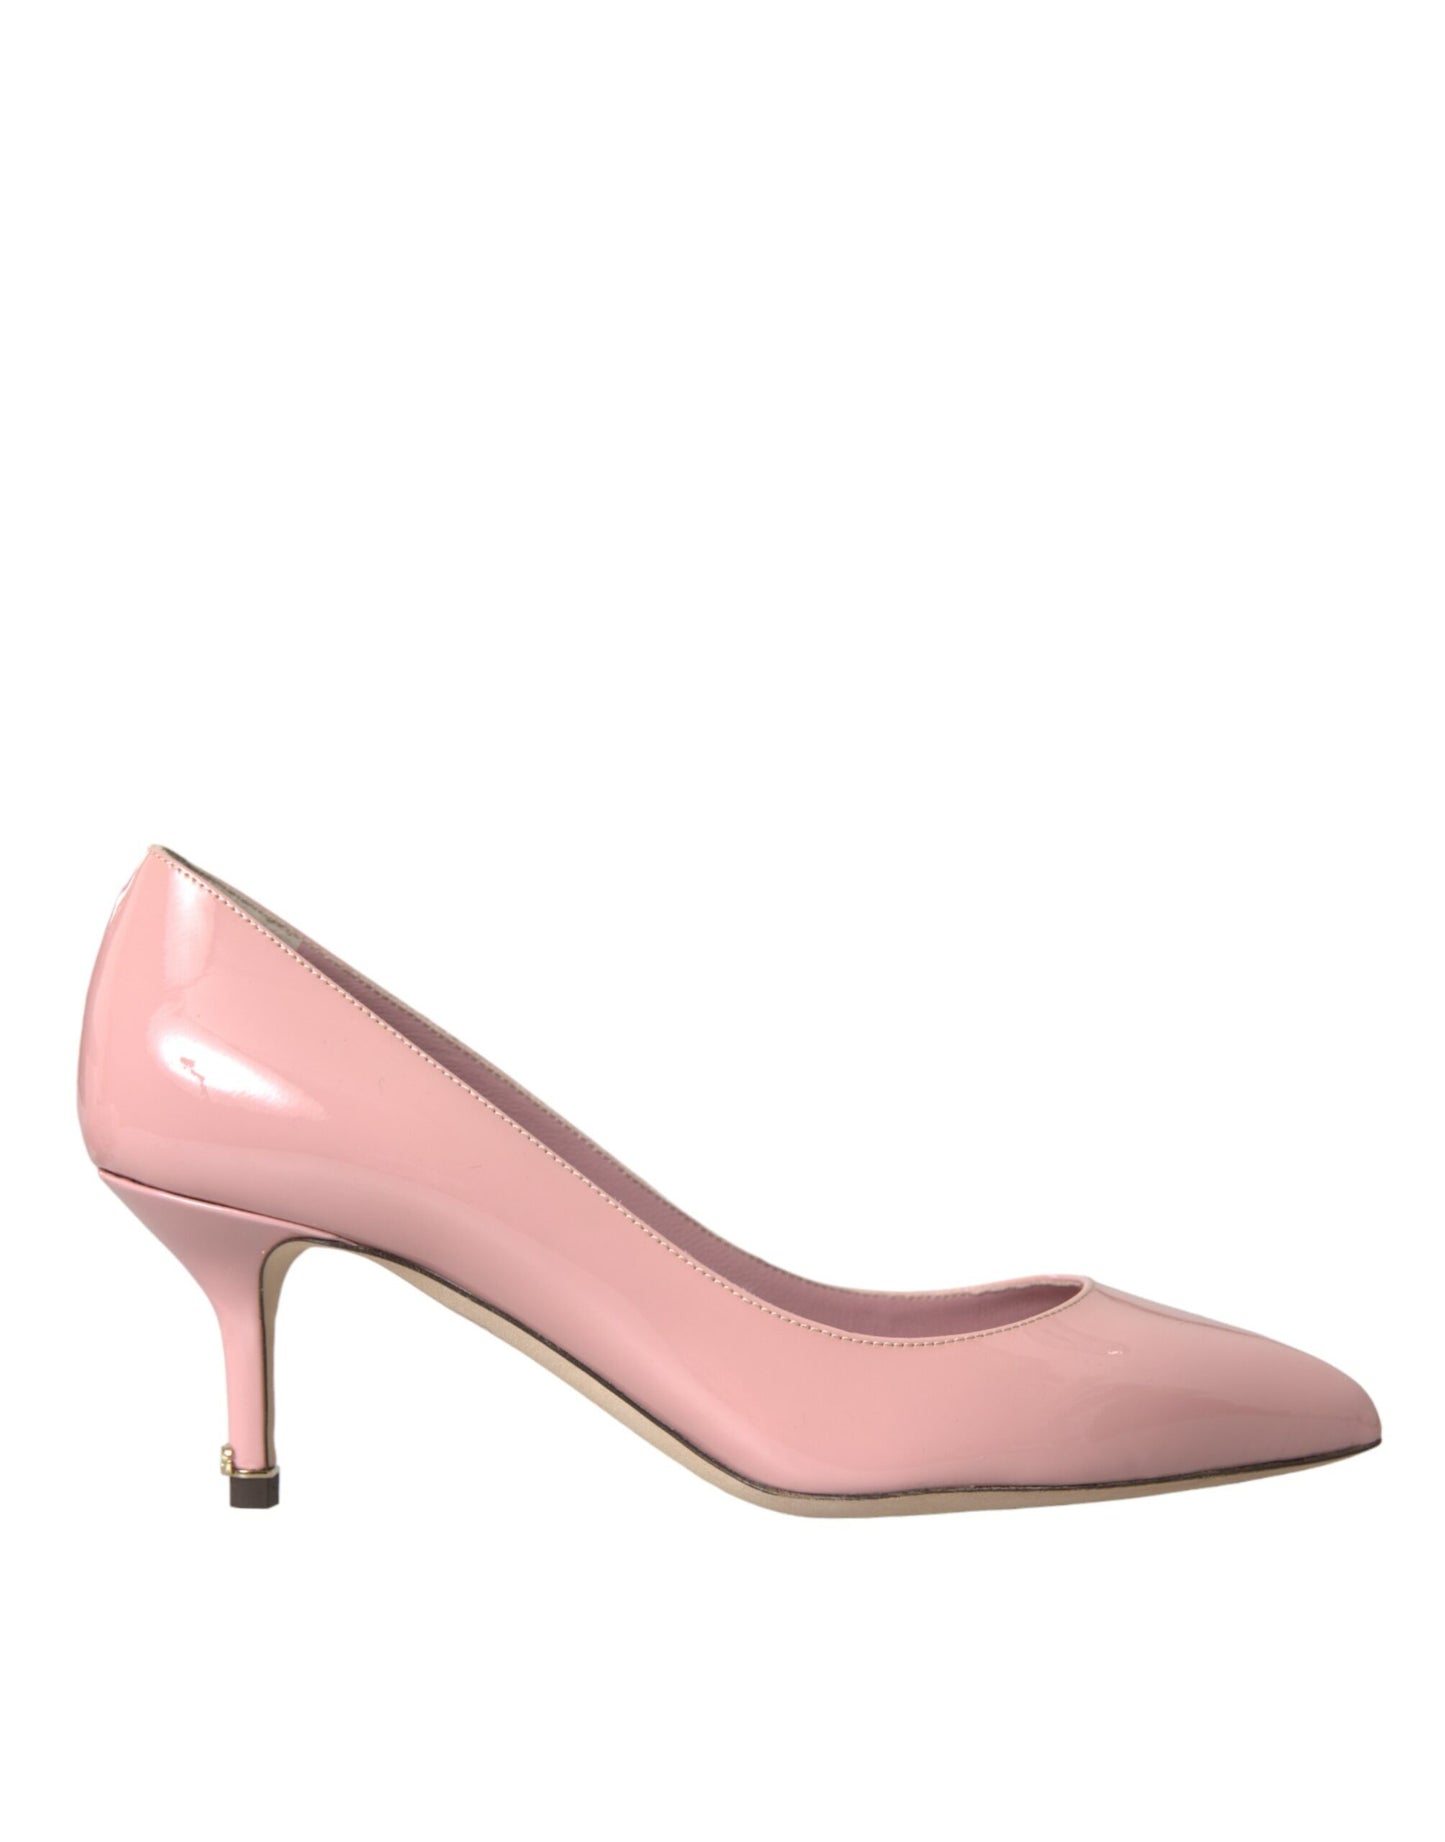 Light Pink Patent Leather Heels Pumps Shoes